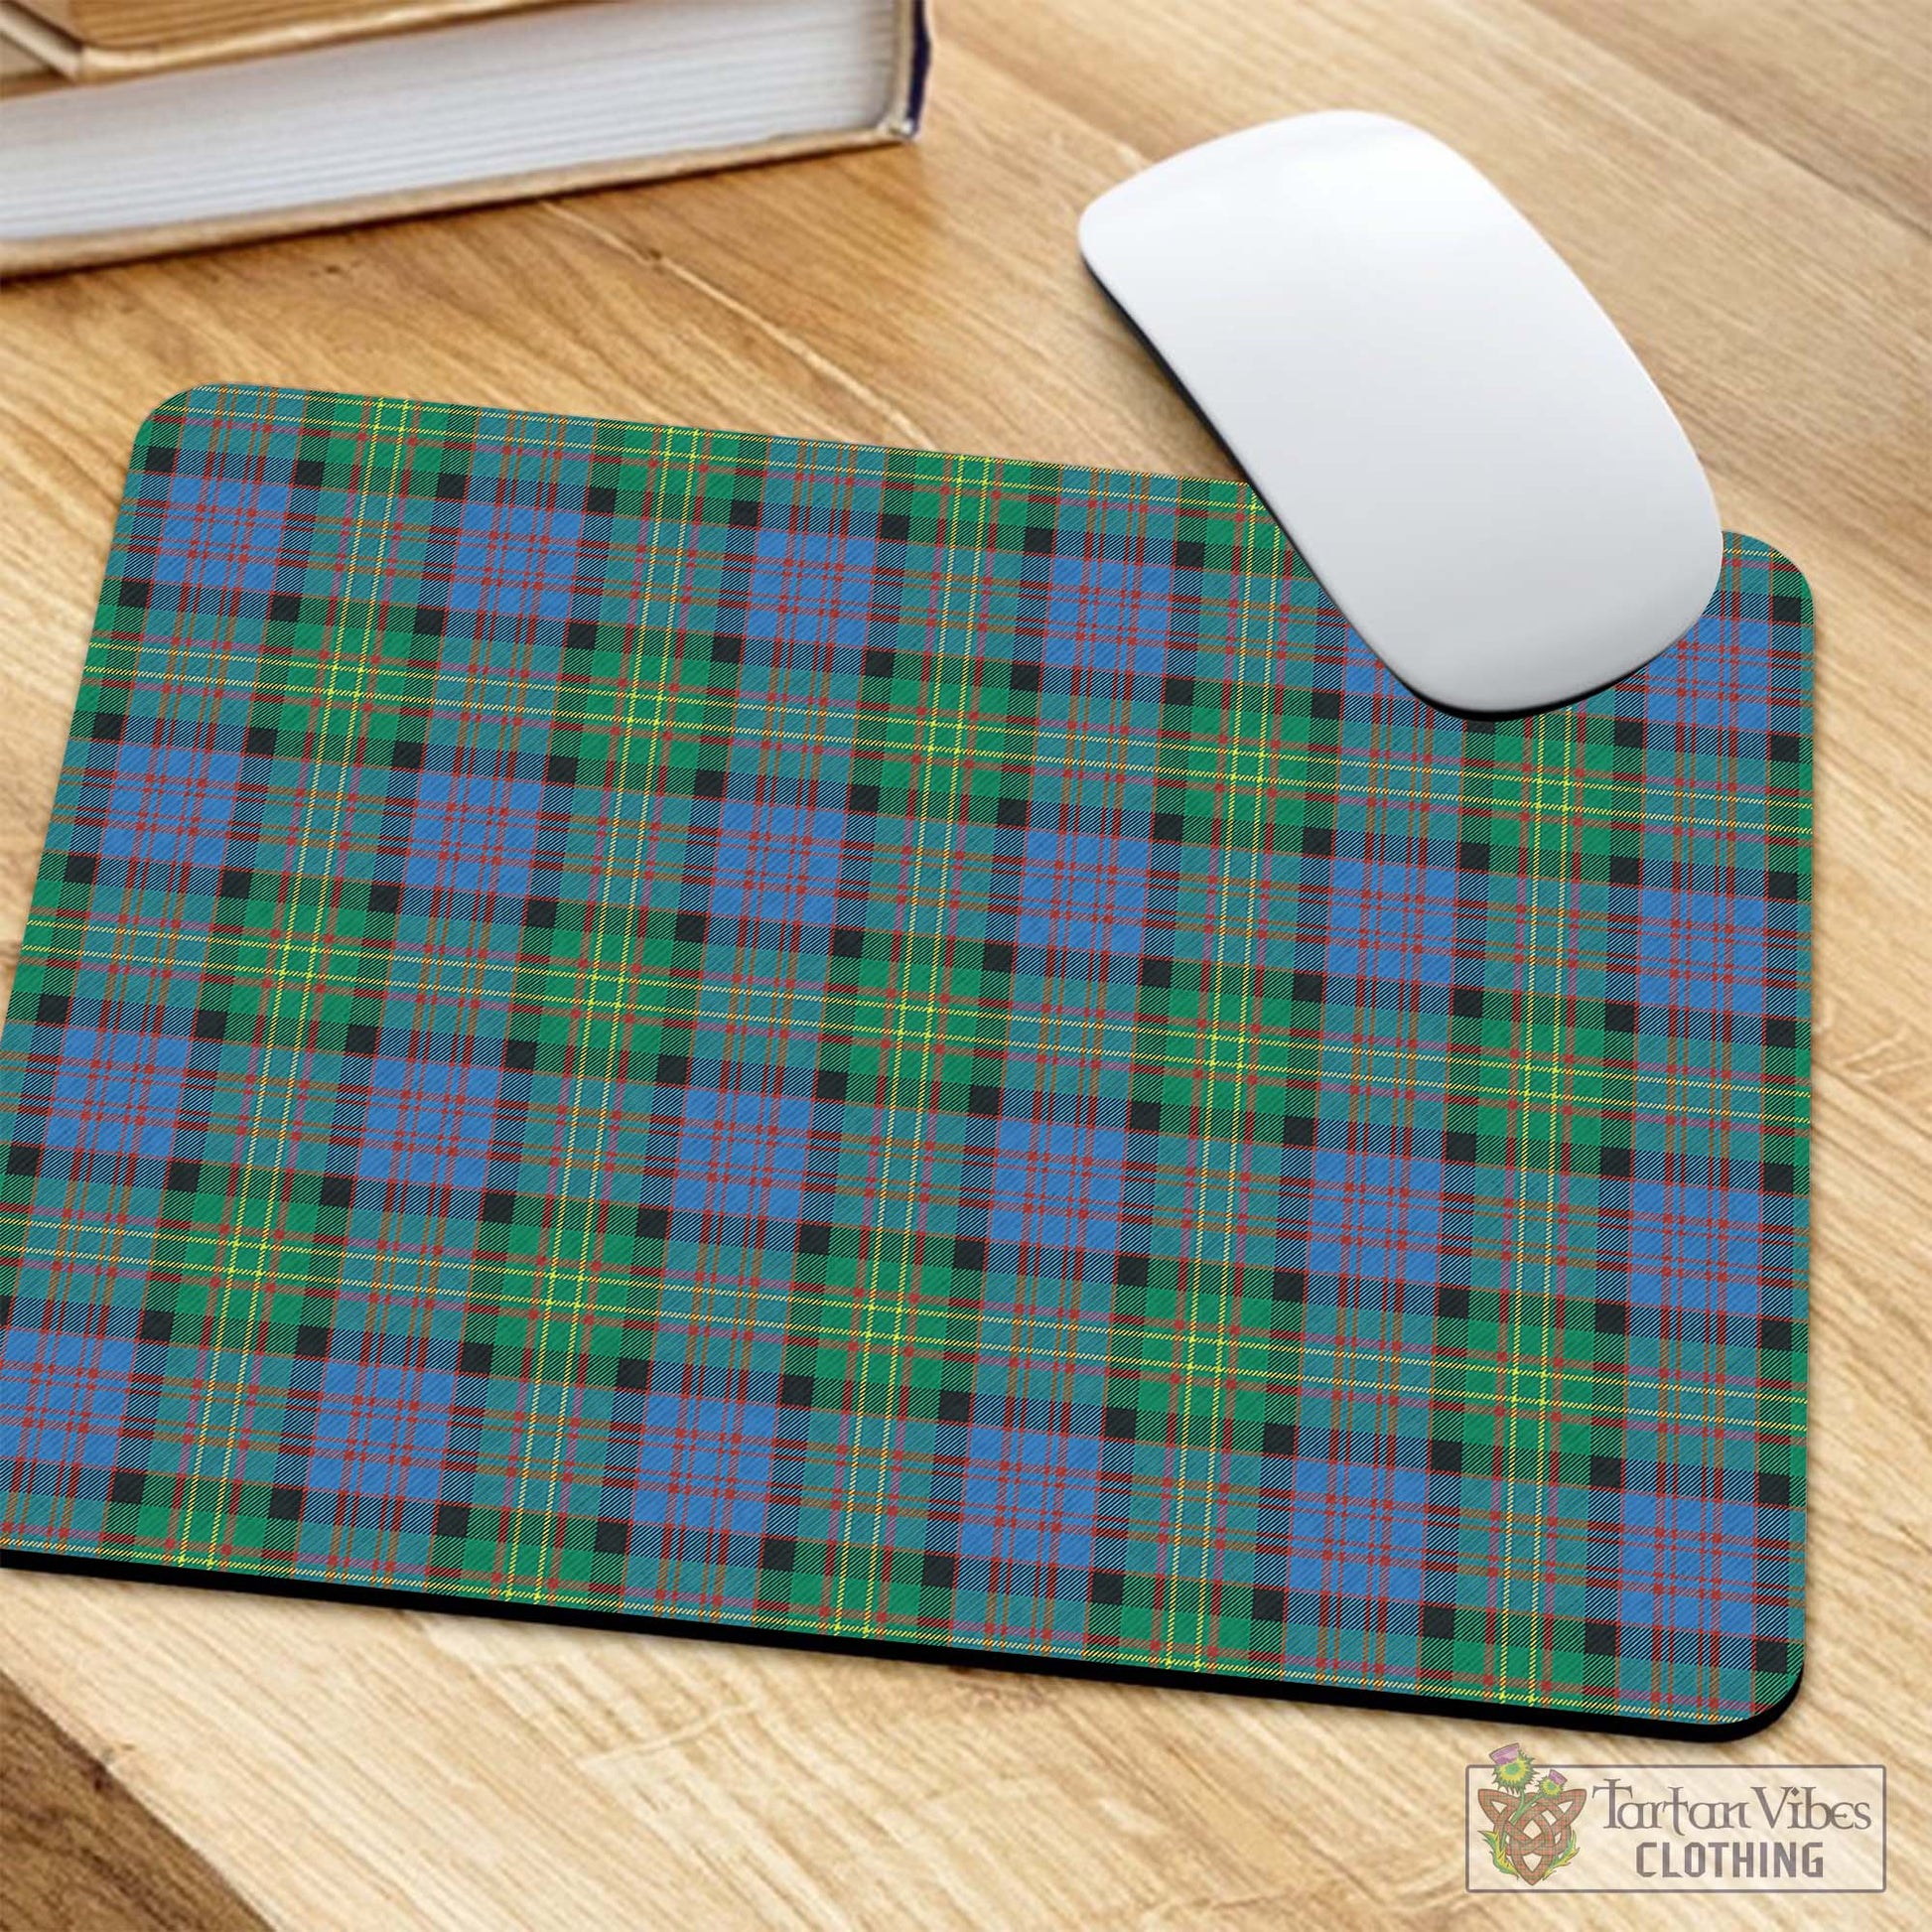 Tartan Vibes Clothing Bowie Ancient Tartan Mouse Pad